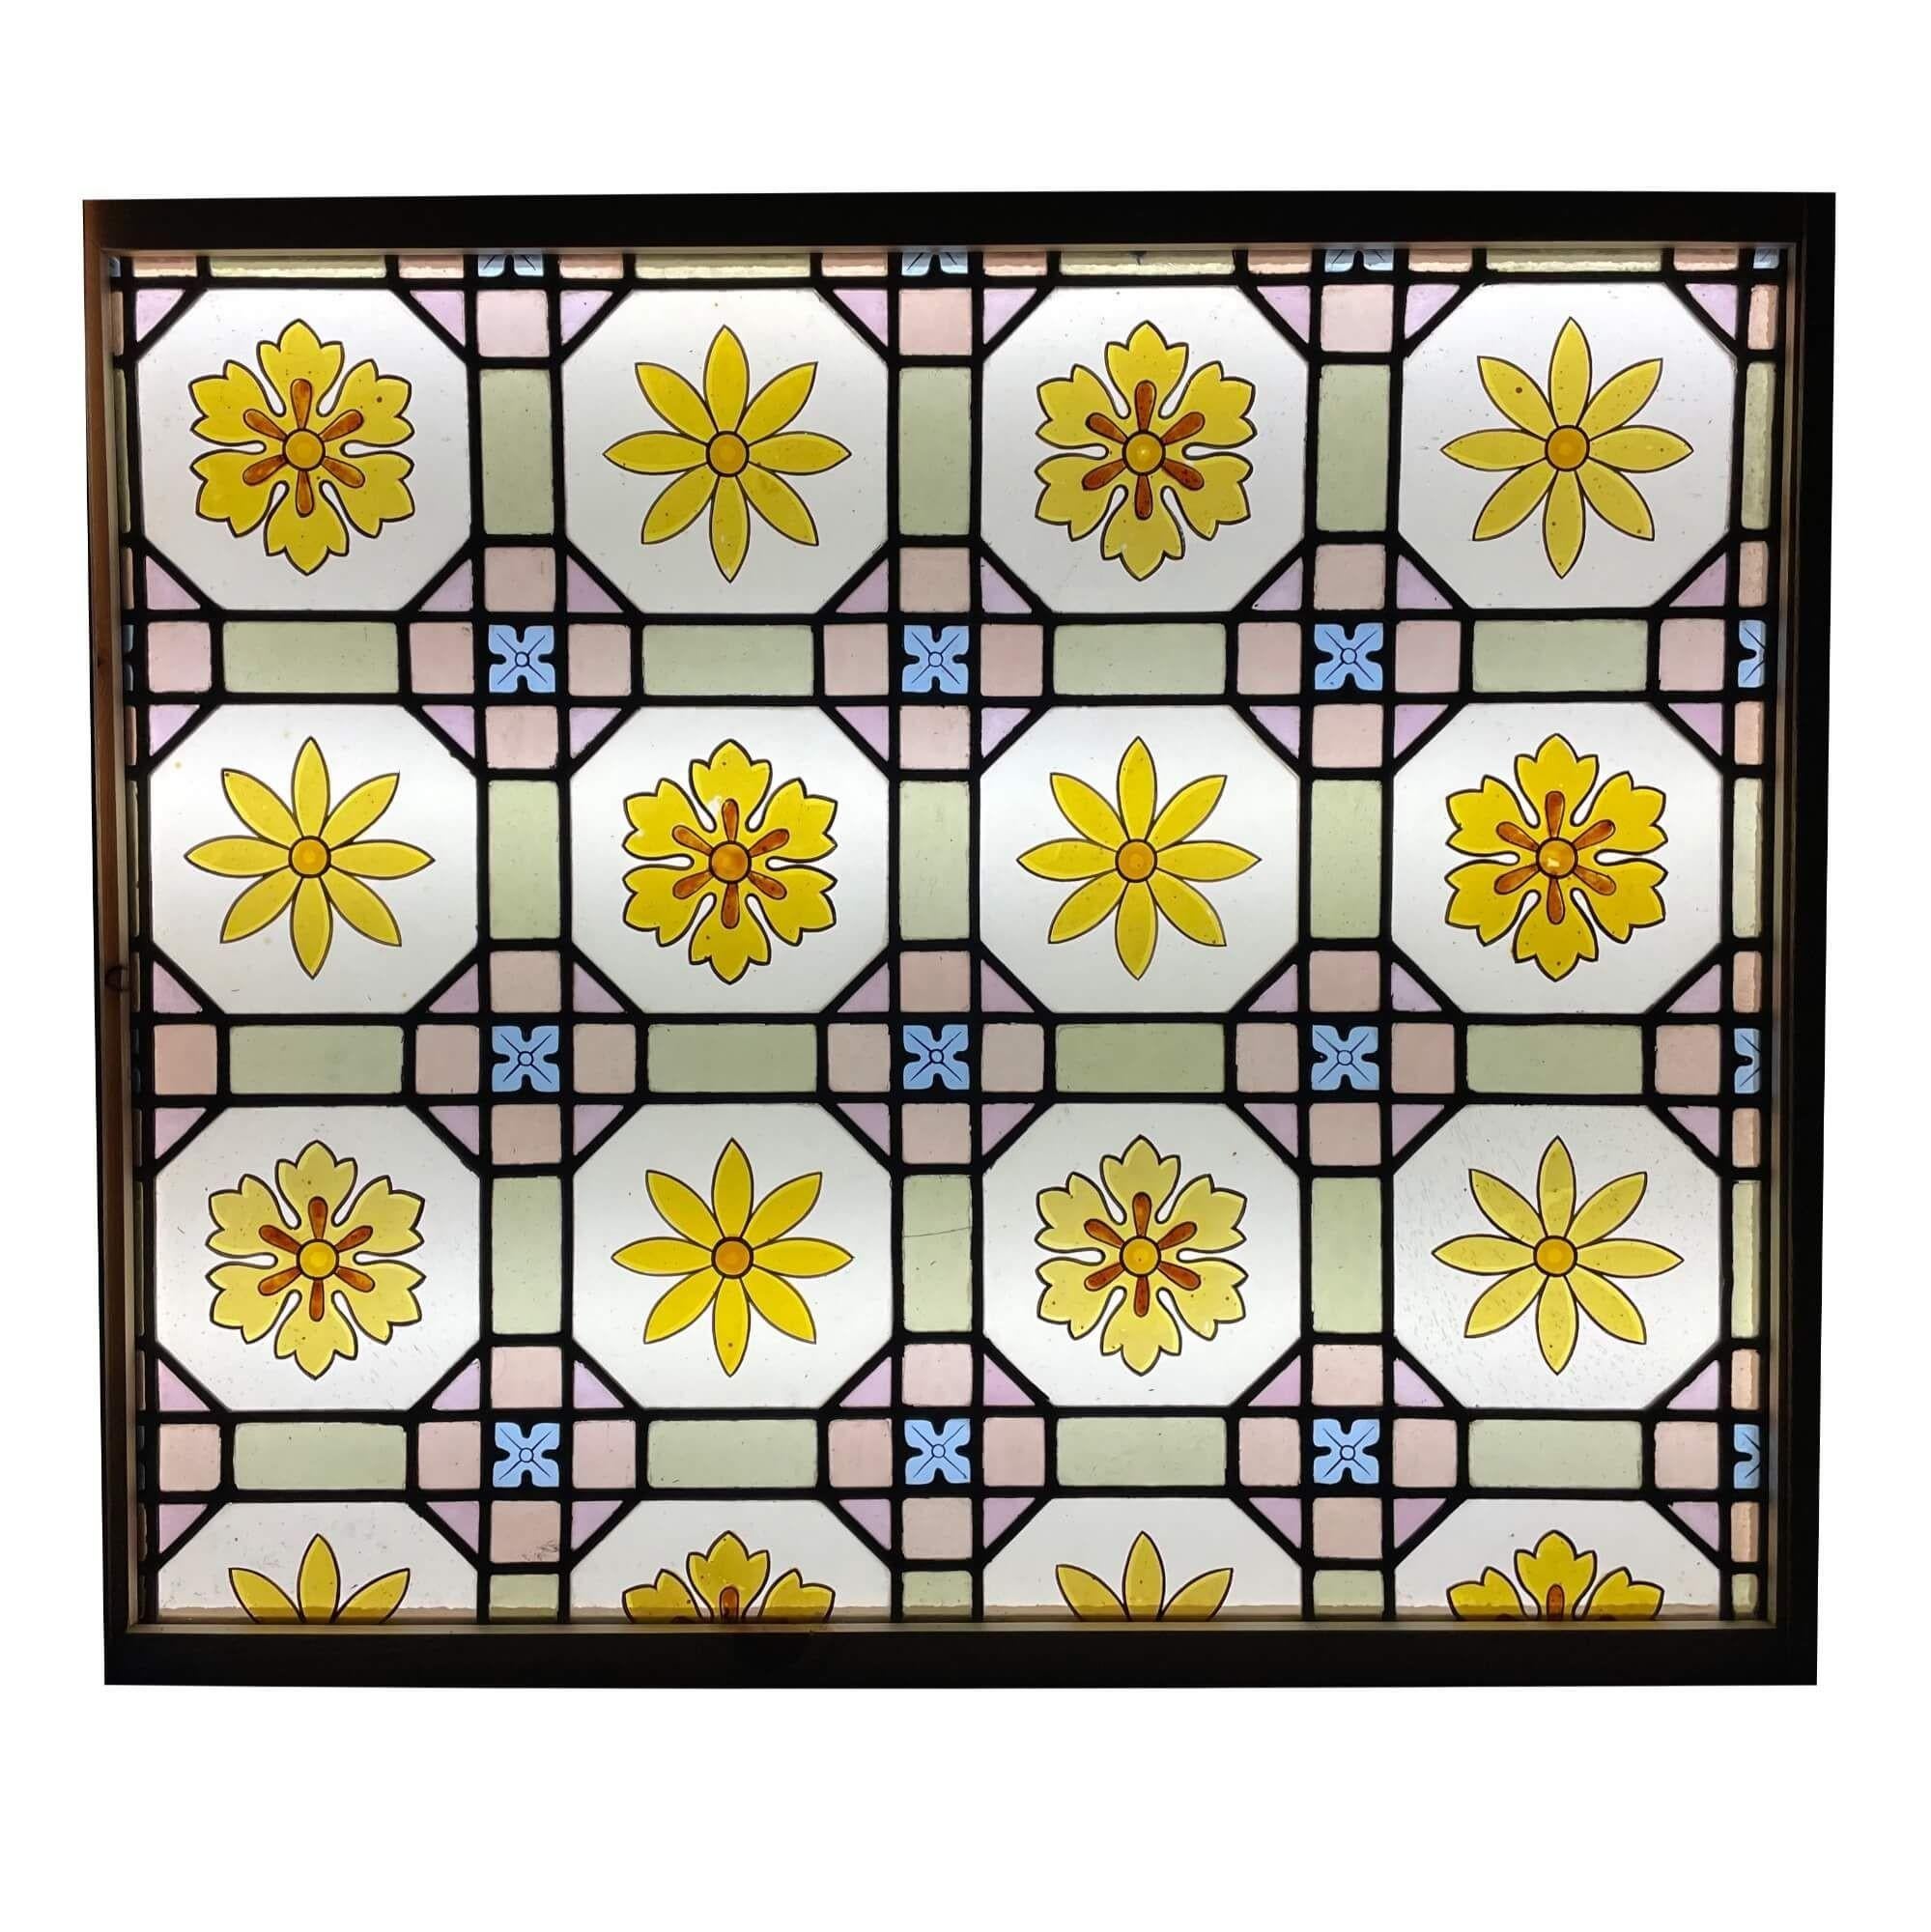 An antique late Victorian floral patterned stained glass window, dating to circa 1890. This late 19th century piece showcases vibrant daisies, accompanied by small blue flowers, in a floral grid.

This beautiful panel is over 100 years old and would